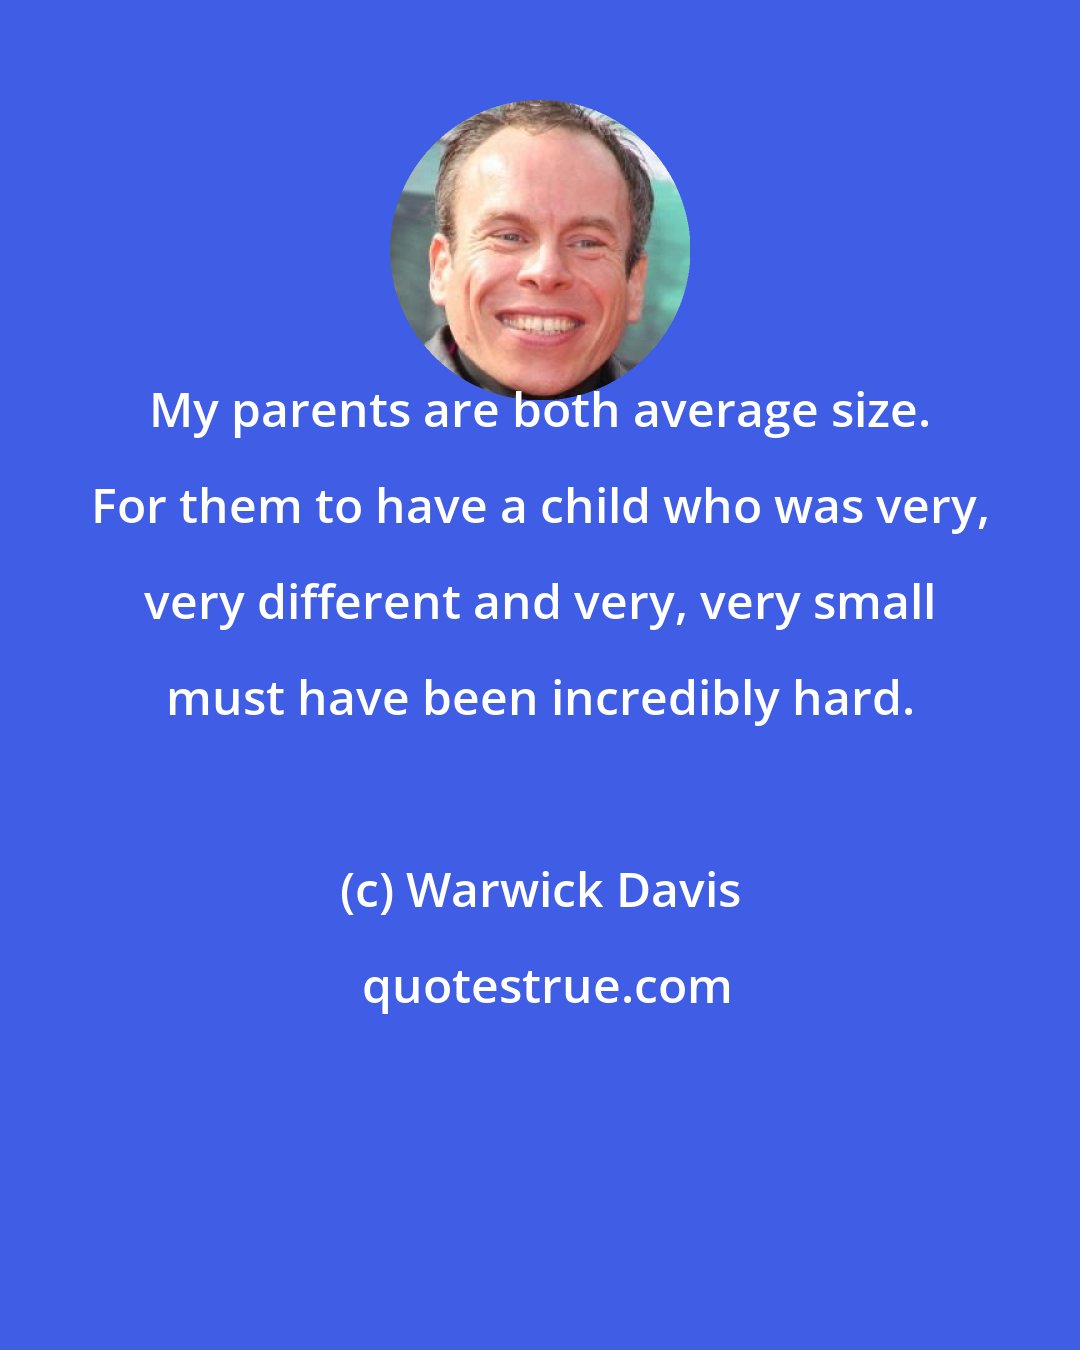 Warwick Davis: My parents are both average size. For them to have a child who was very, very different and very, very small must have been incredibly hard.